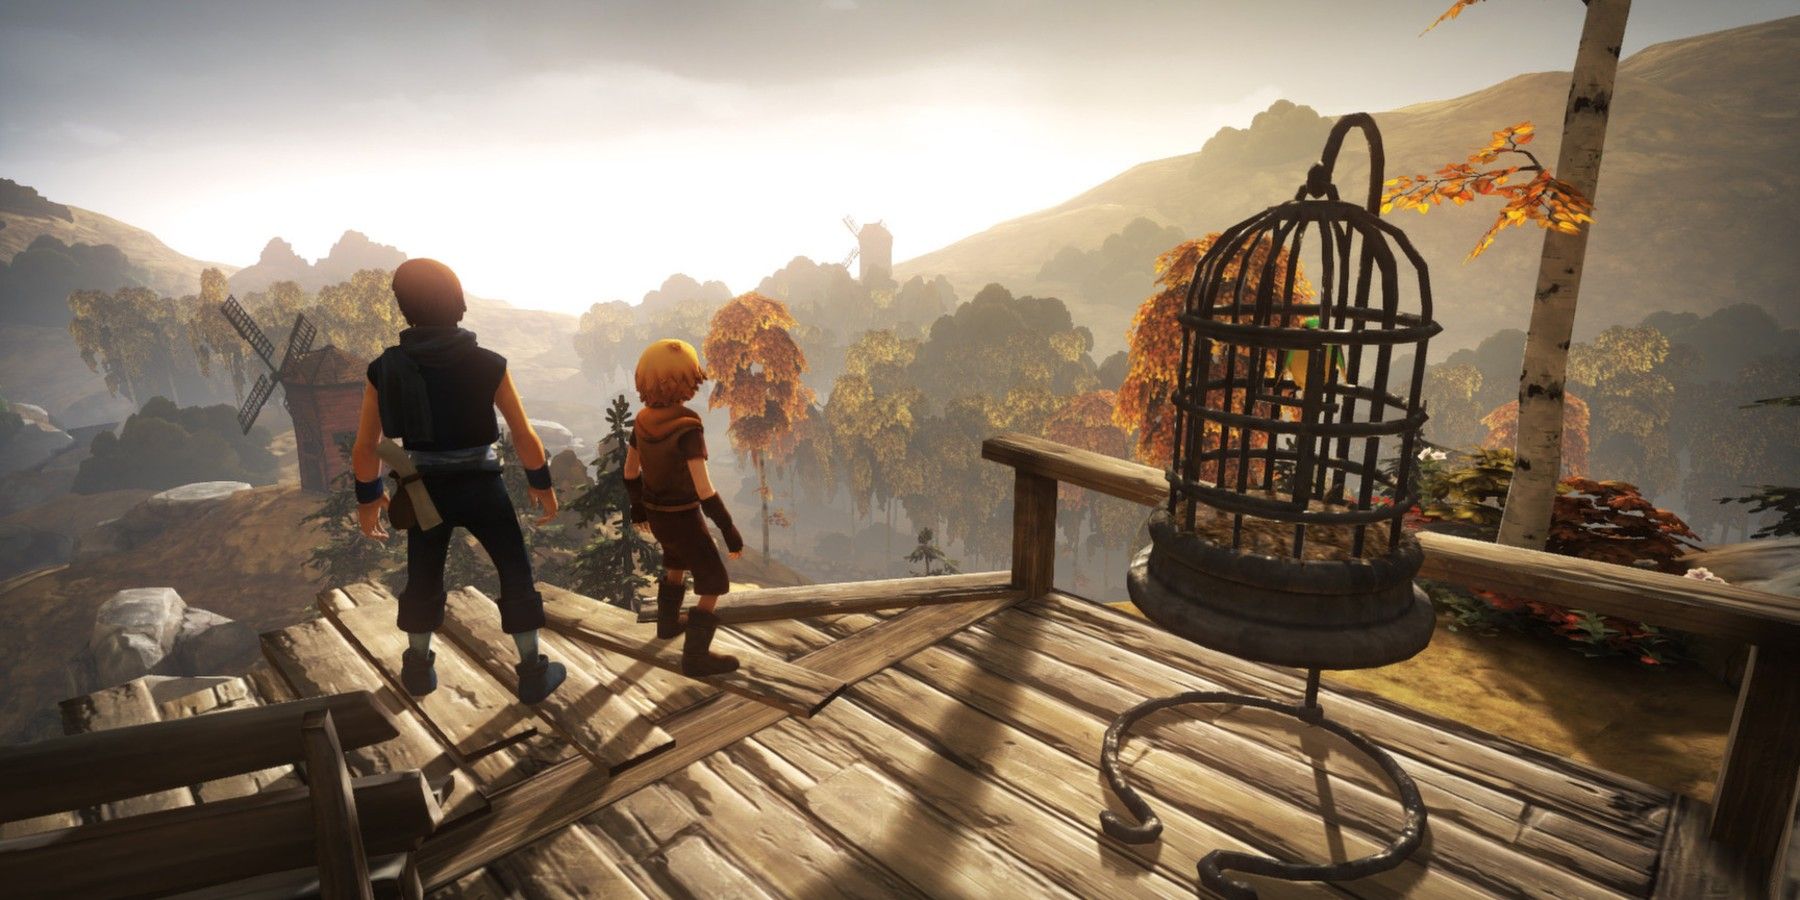 The two brothers looking over the land in Brothers: A Tale Of Two Sons